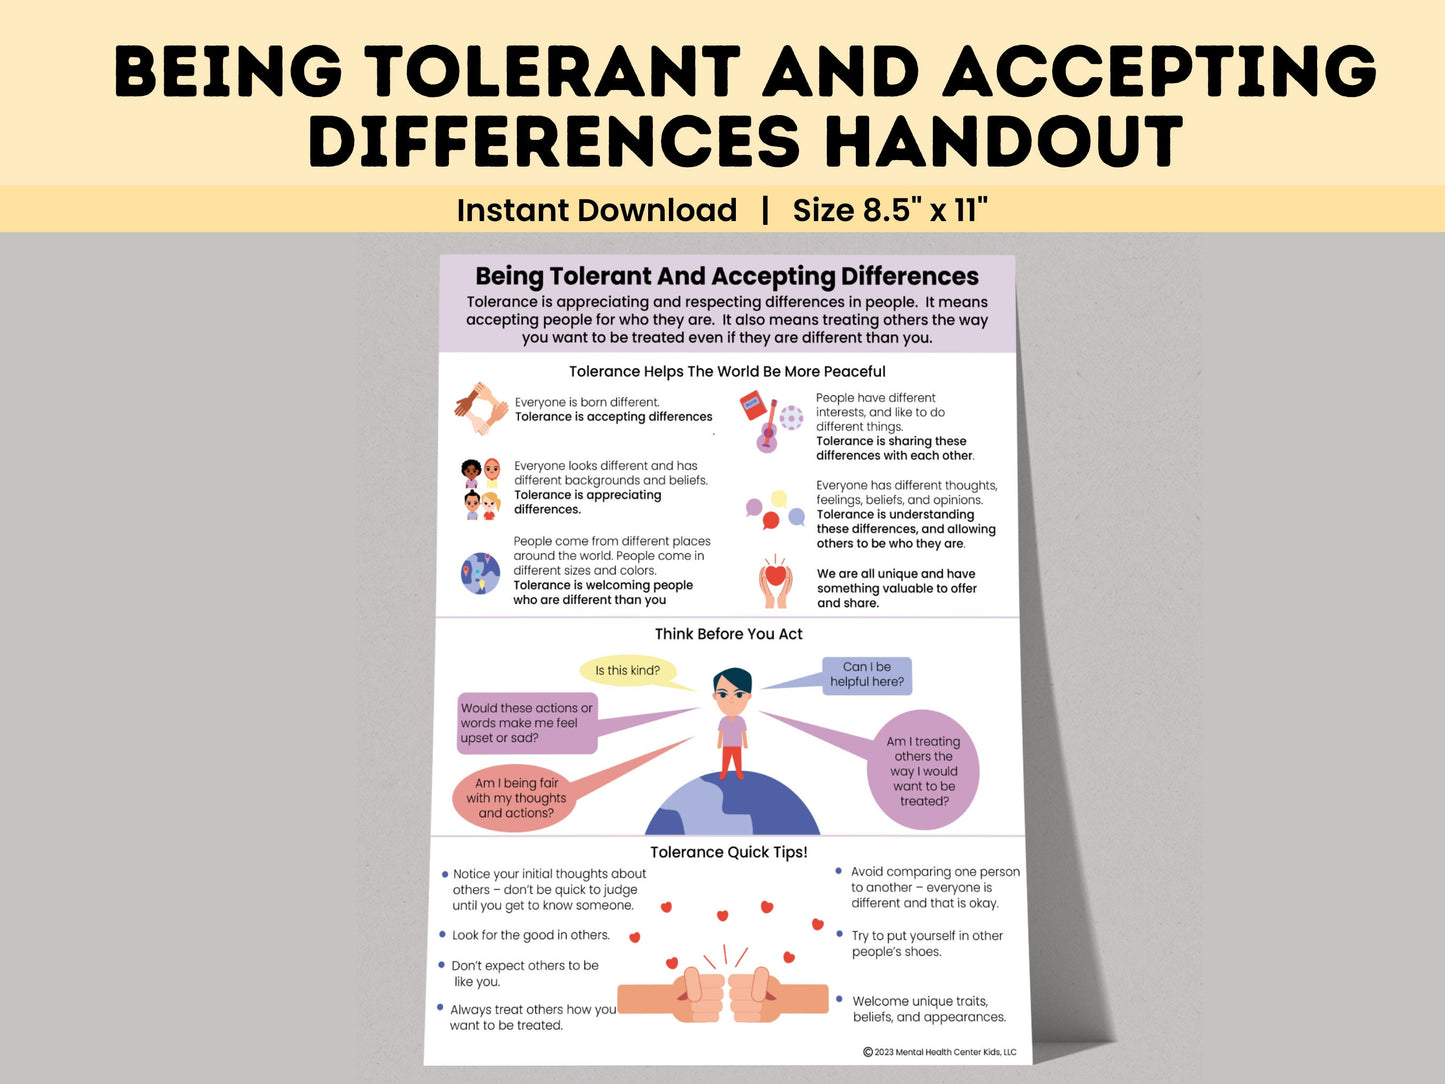 Being Tolerant and Accepting Differences